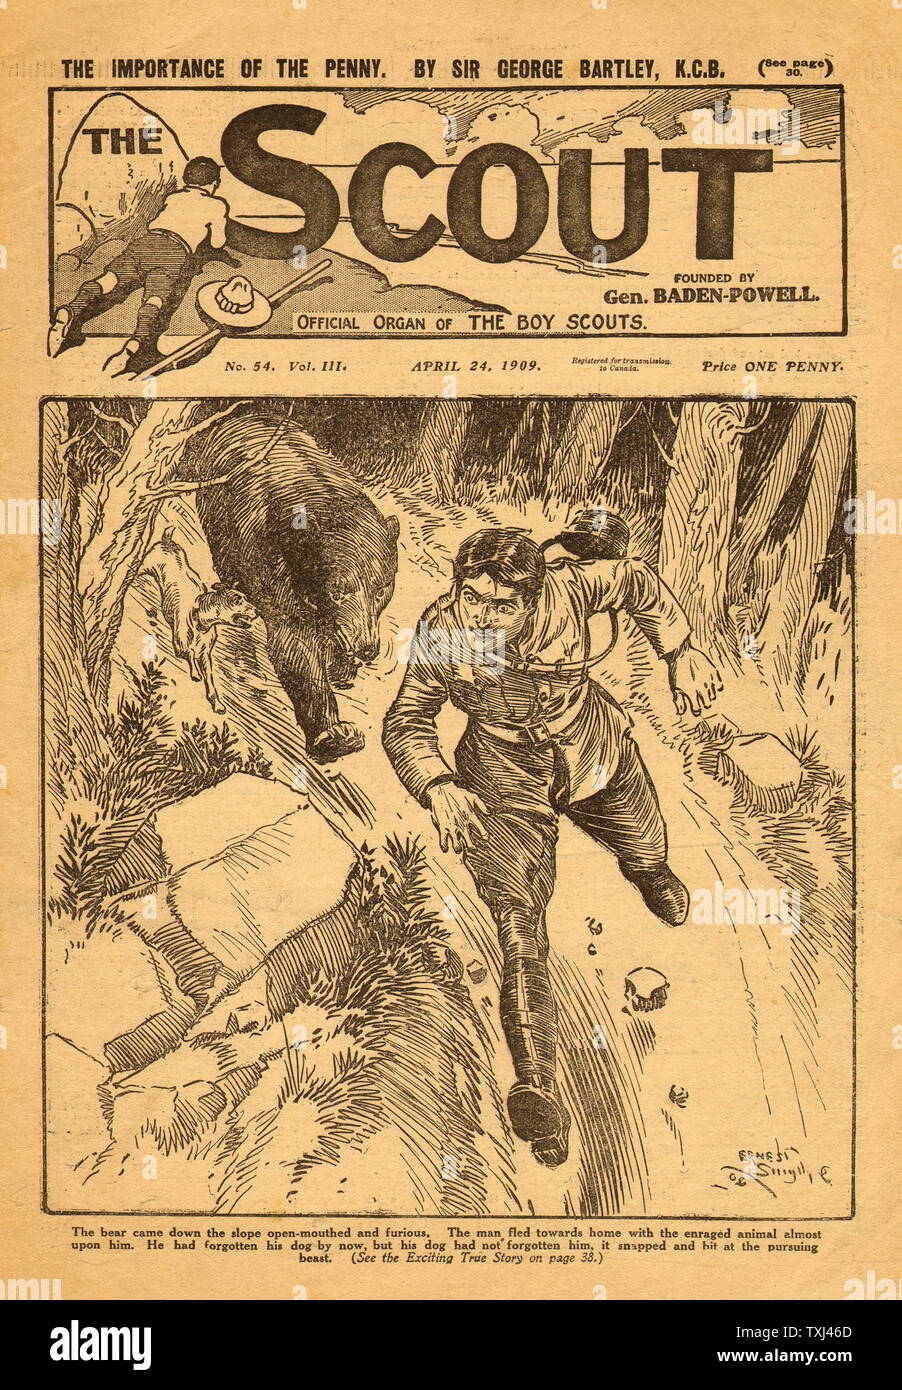 1909 The Scout front page Boy Scout's magazine Stock Photo - Alamy